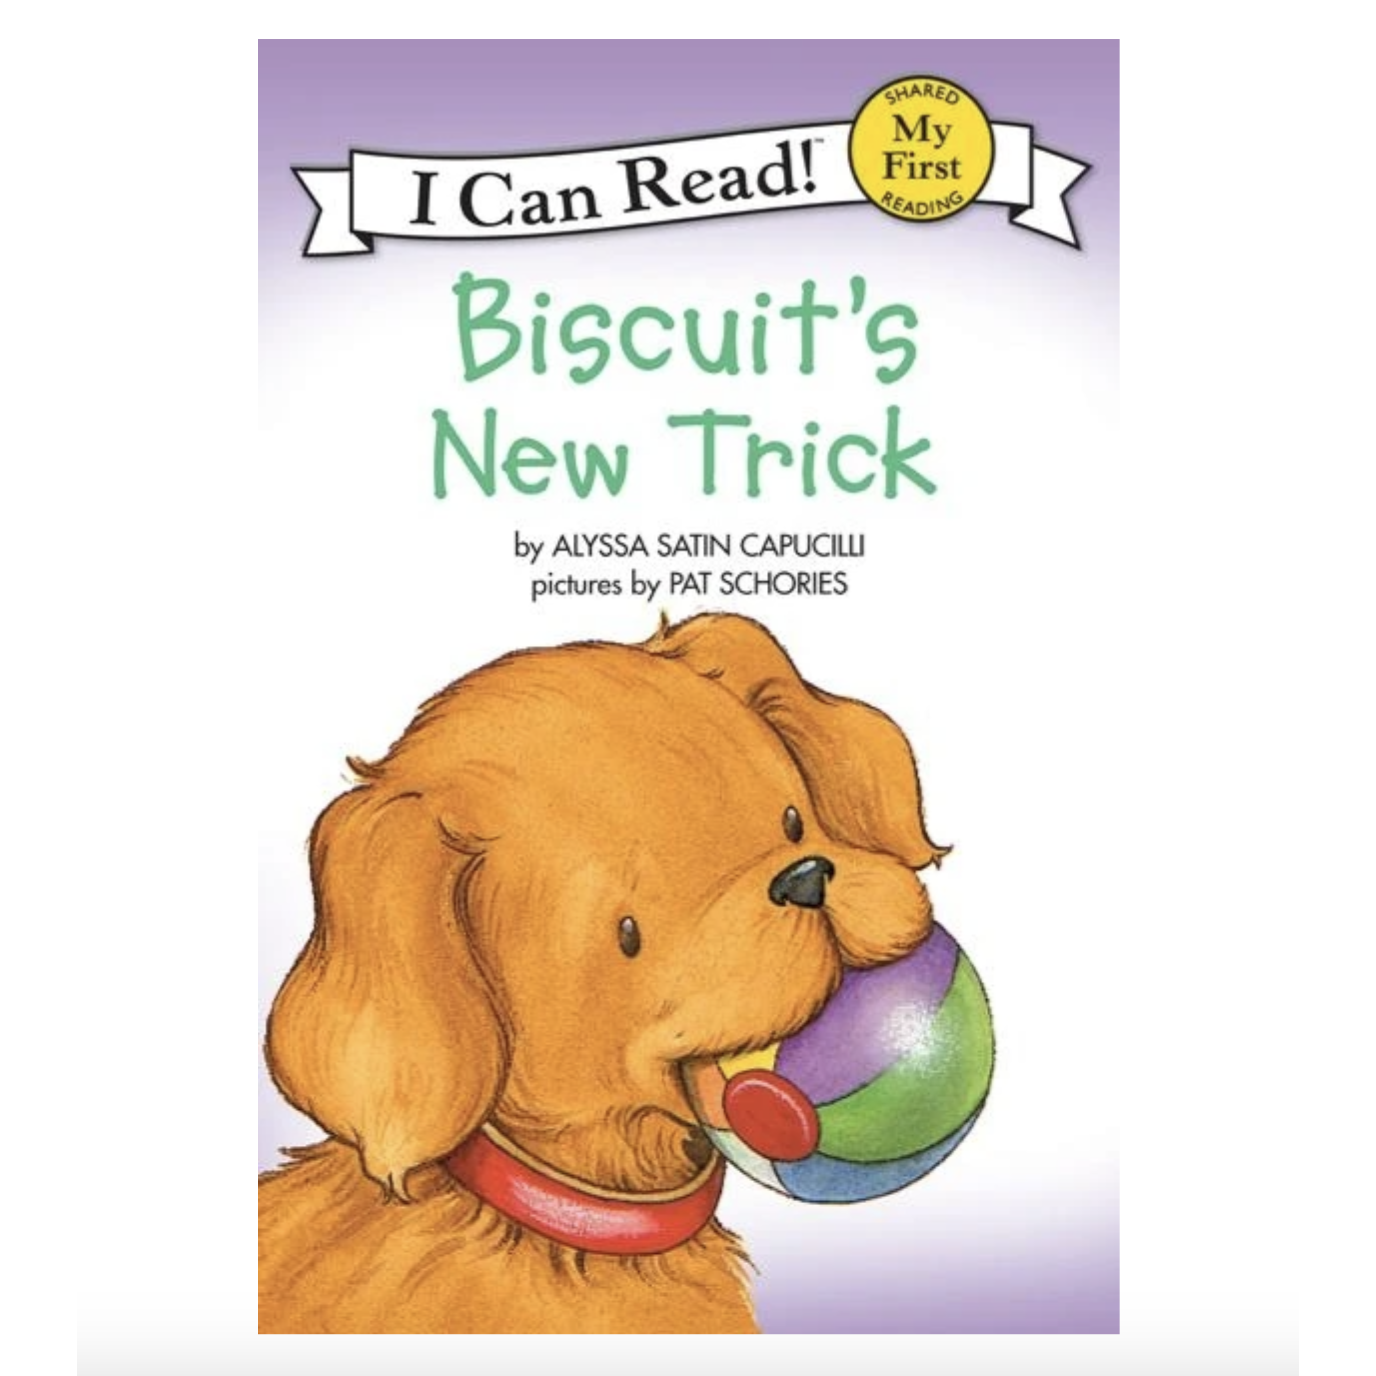 Harper Collins: My First I Can Read: Biscuit's New Trick-HARPER COLLINS PUBLISHERS-Little Giant Kidz